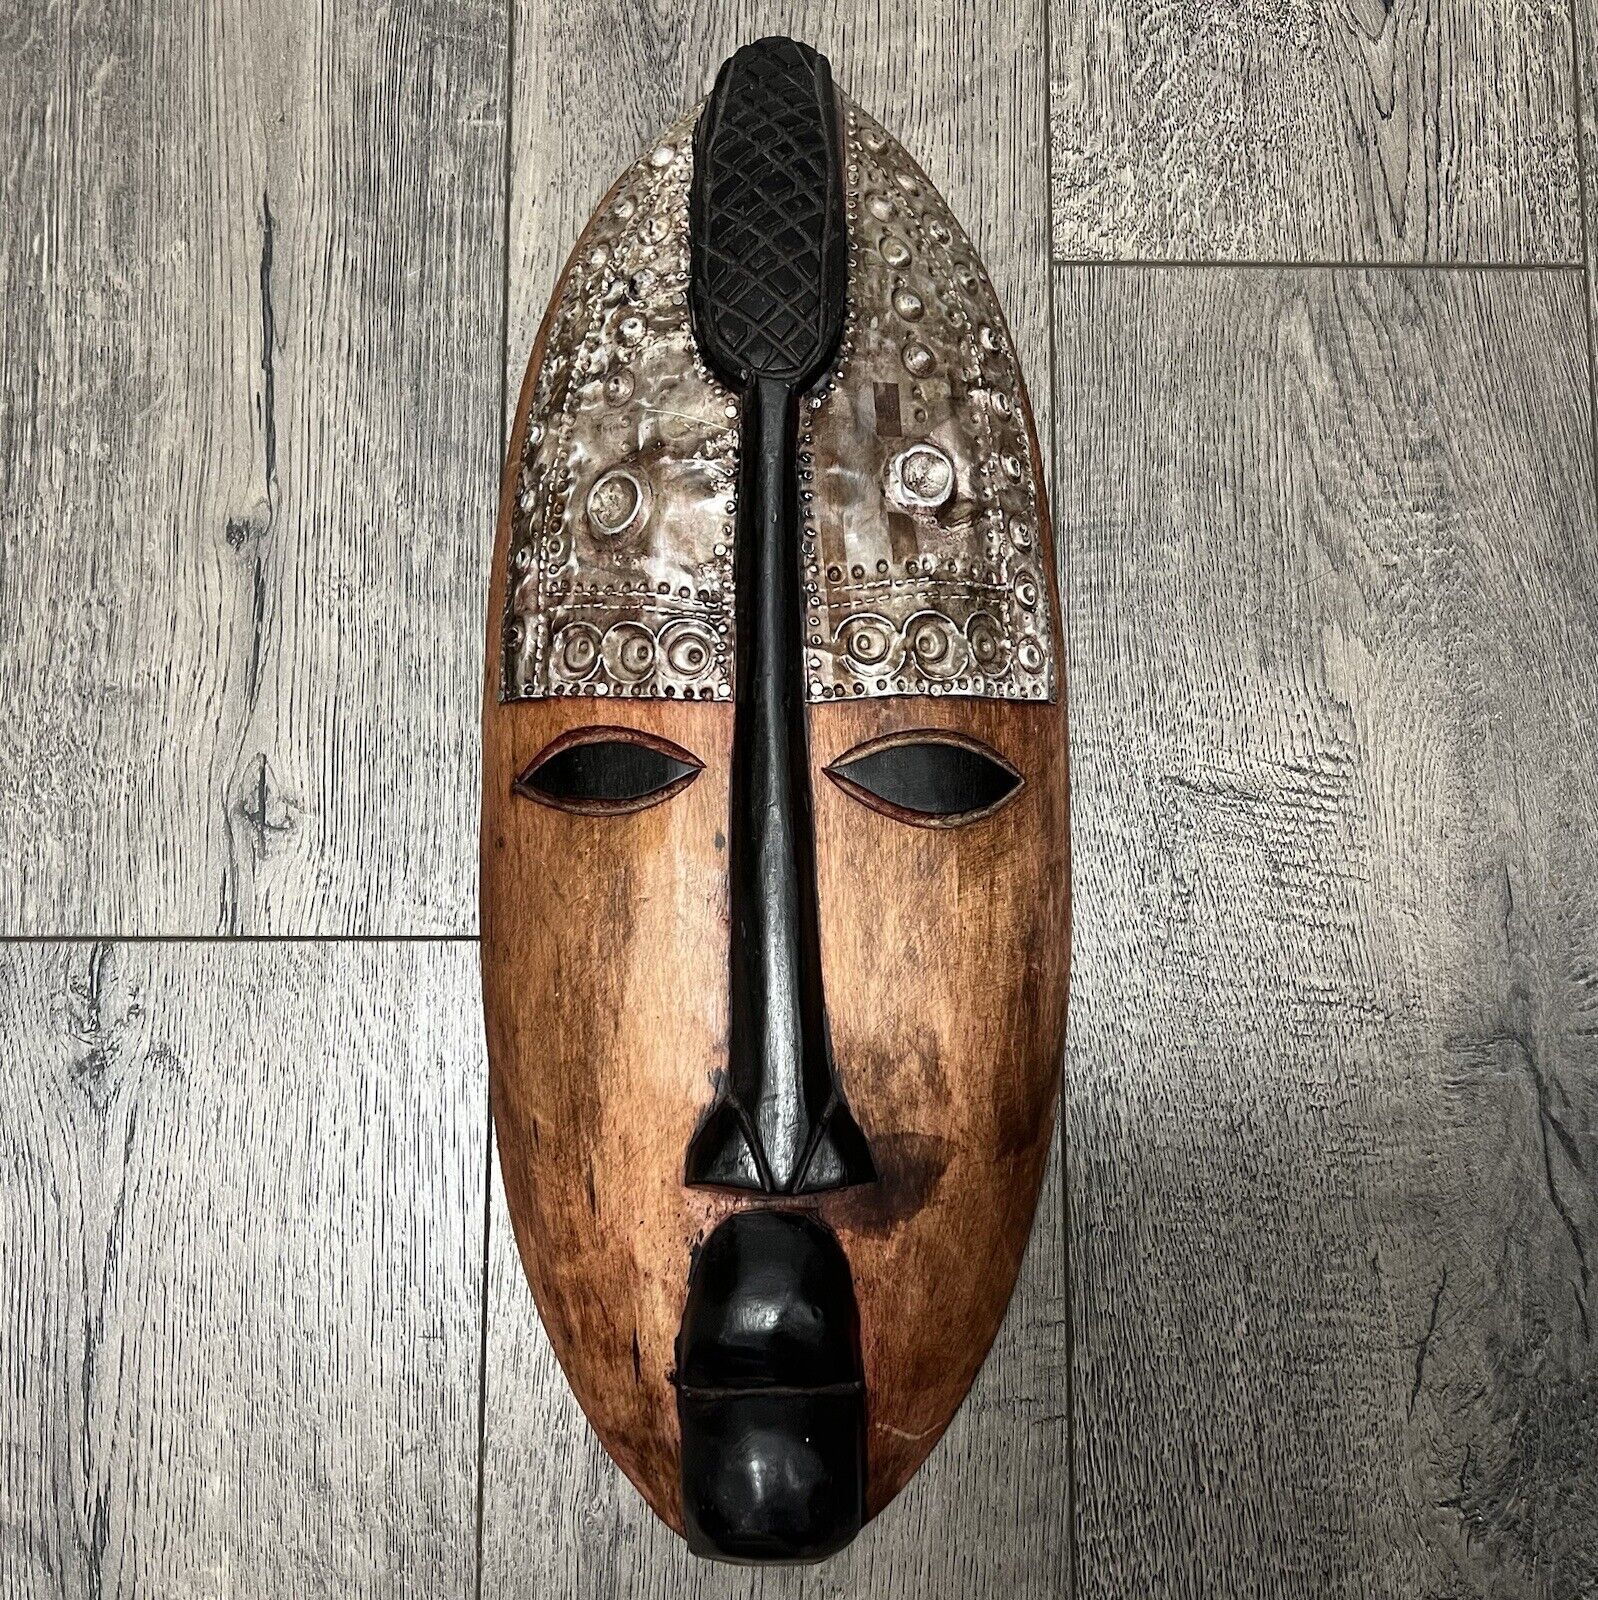 Handcrafted African Wood/ Metal Carved Tribal Wallhanging Art Mask Made in Ghana